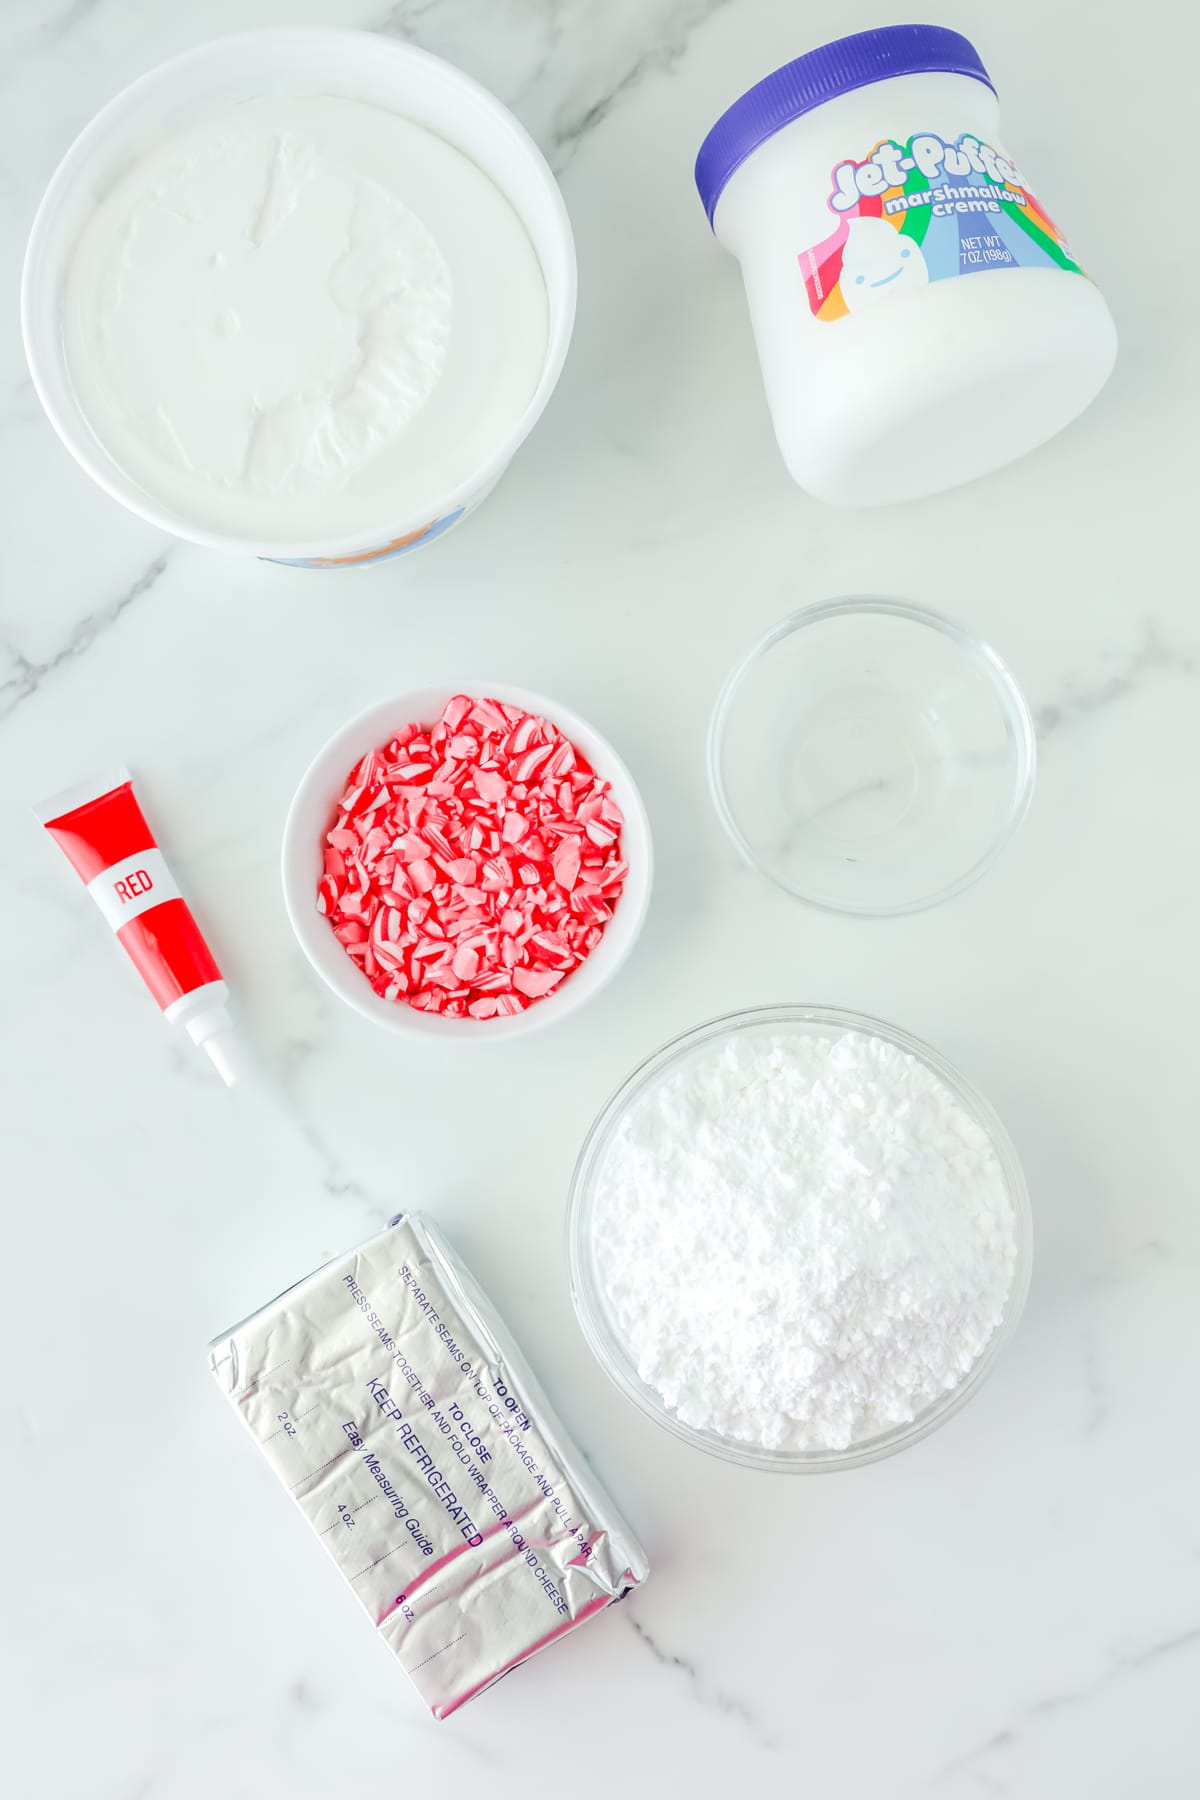 The ingredients for Peppermint Fluff are the following: cream cheese, softened, powdered sugar, marshmallow cream, frozen whipped topping, thawed, peppermint extract, red gel food coloring and crushed candy canes